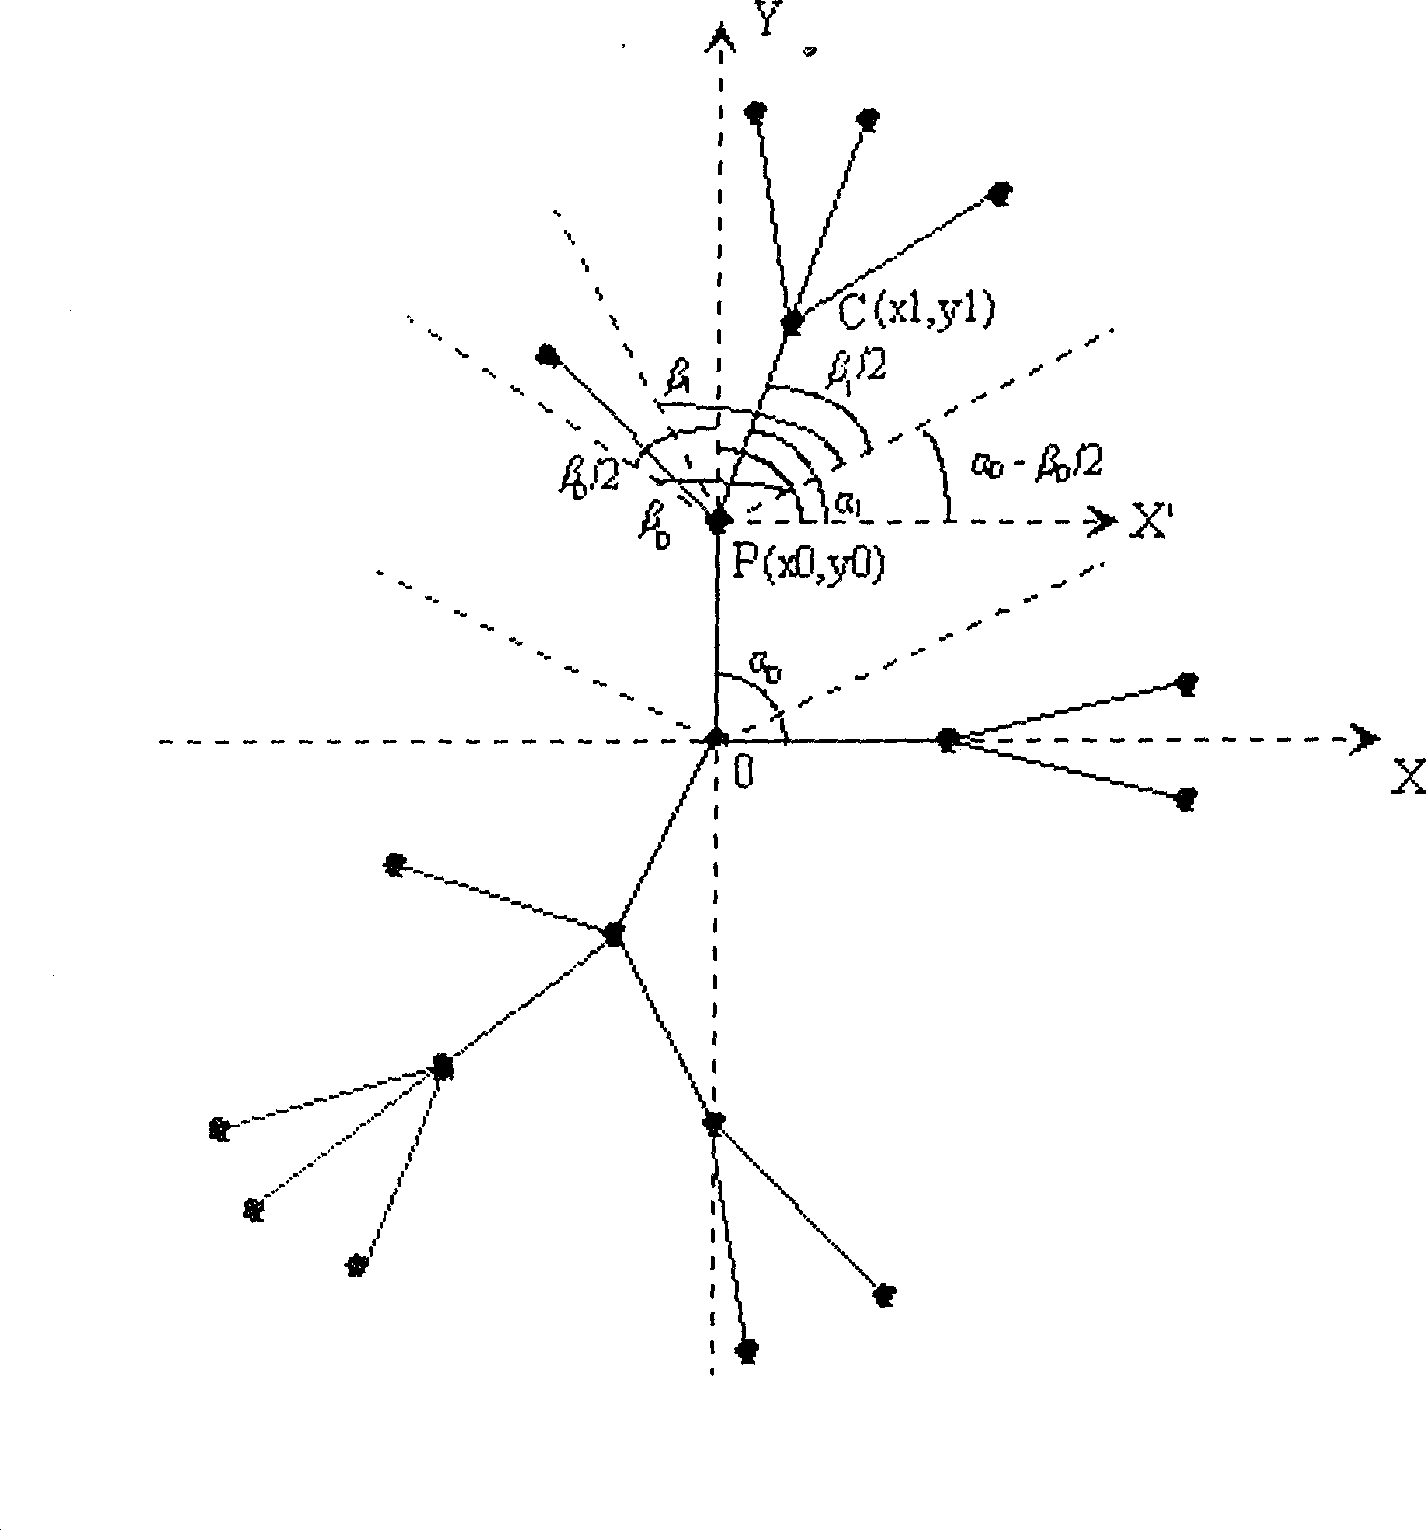 Graphical representation method of topological structure of network notes